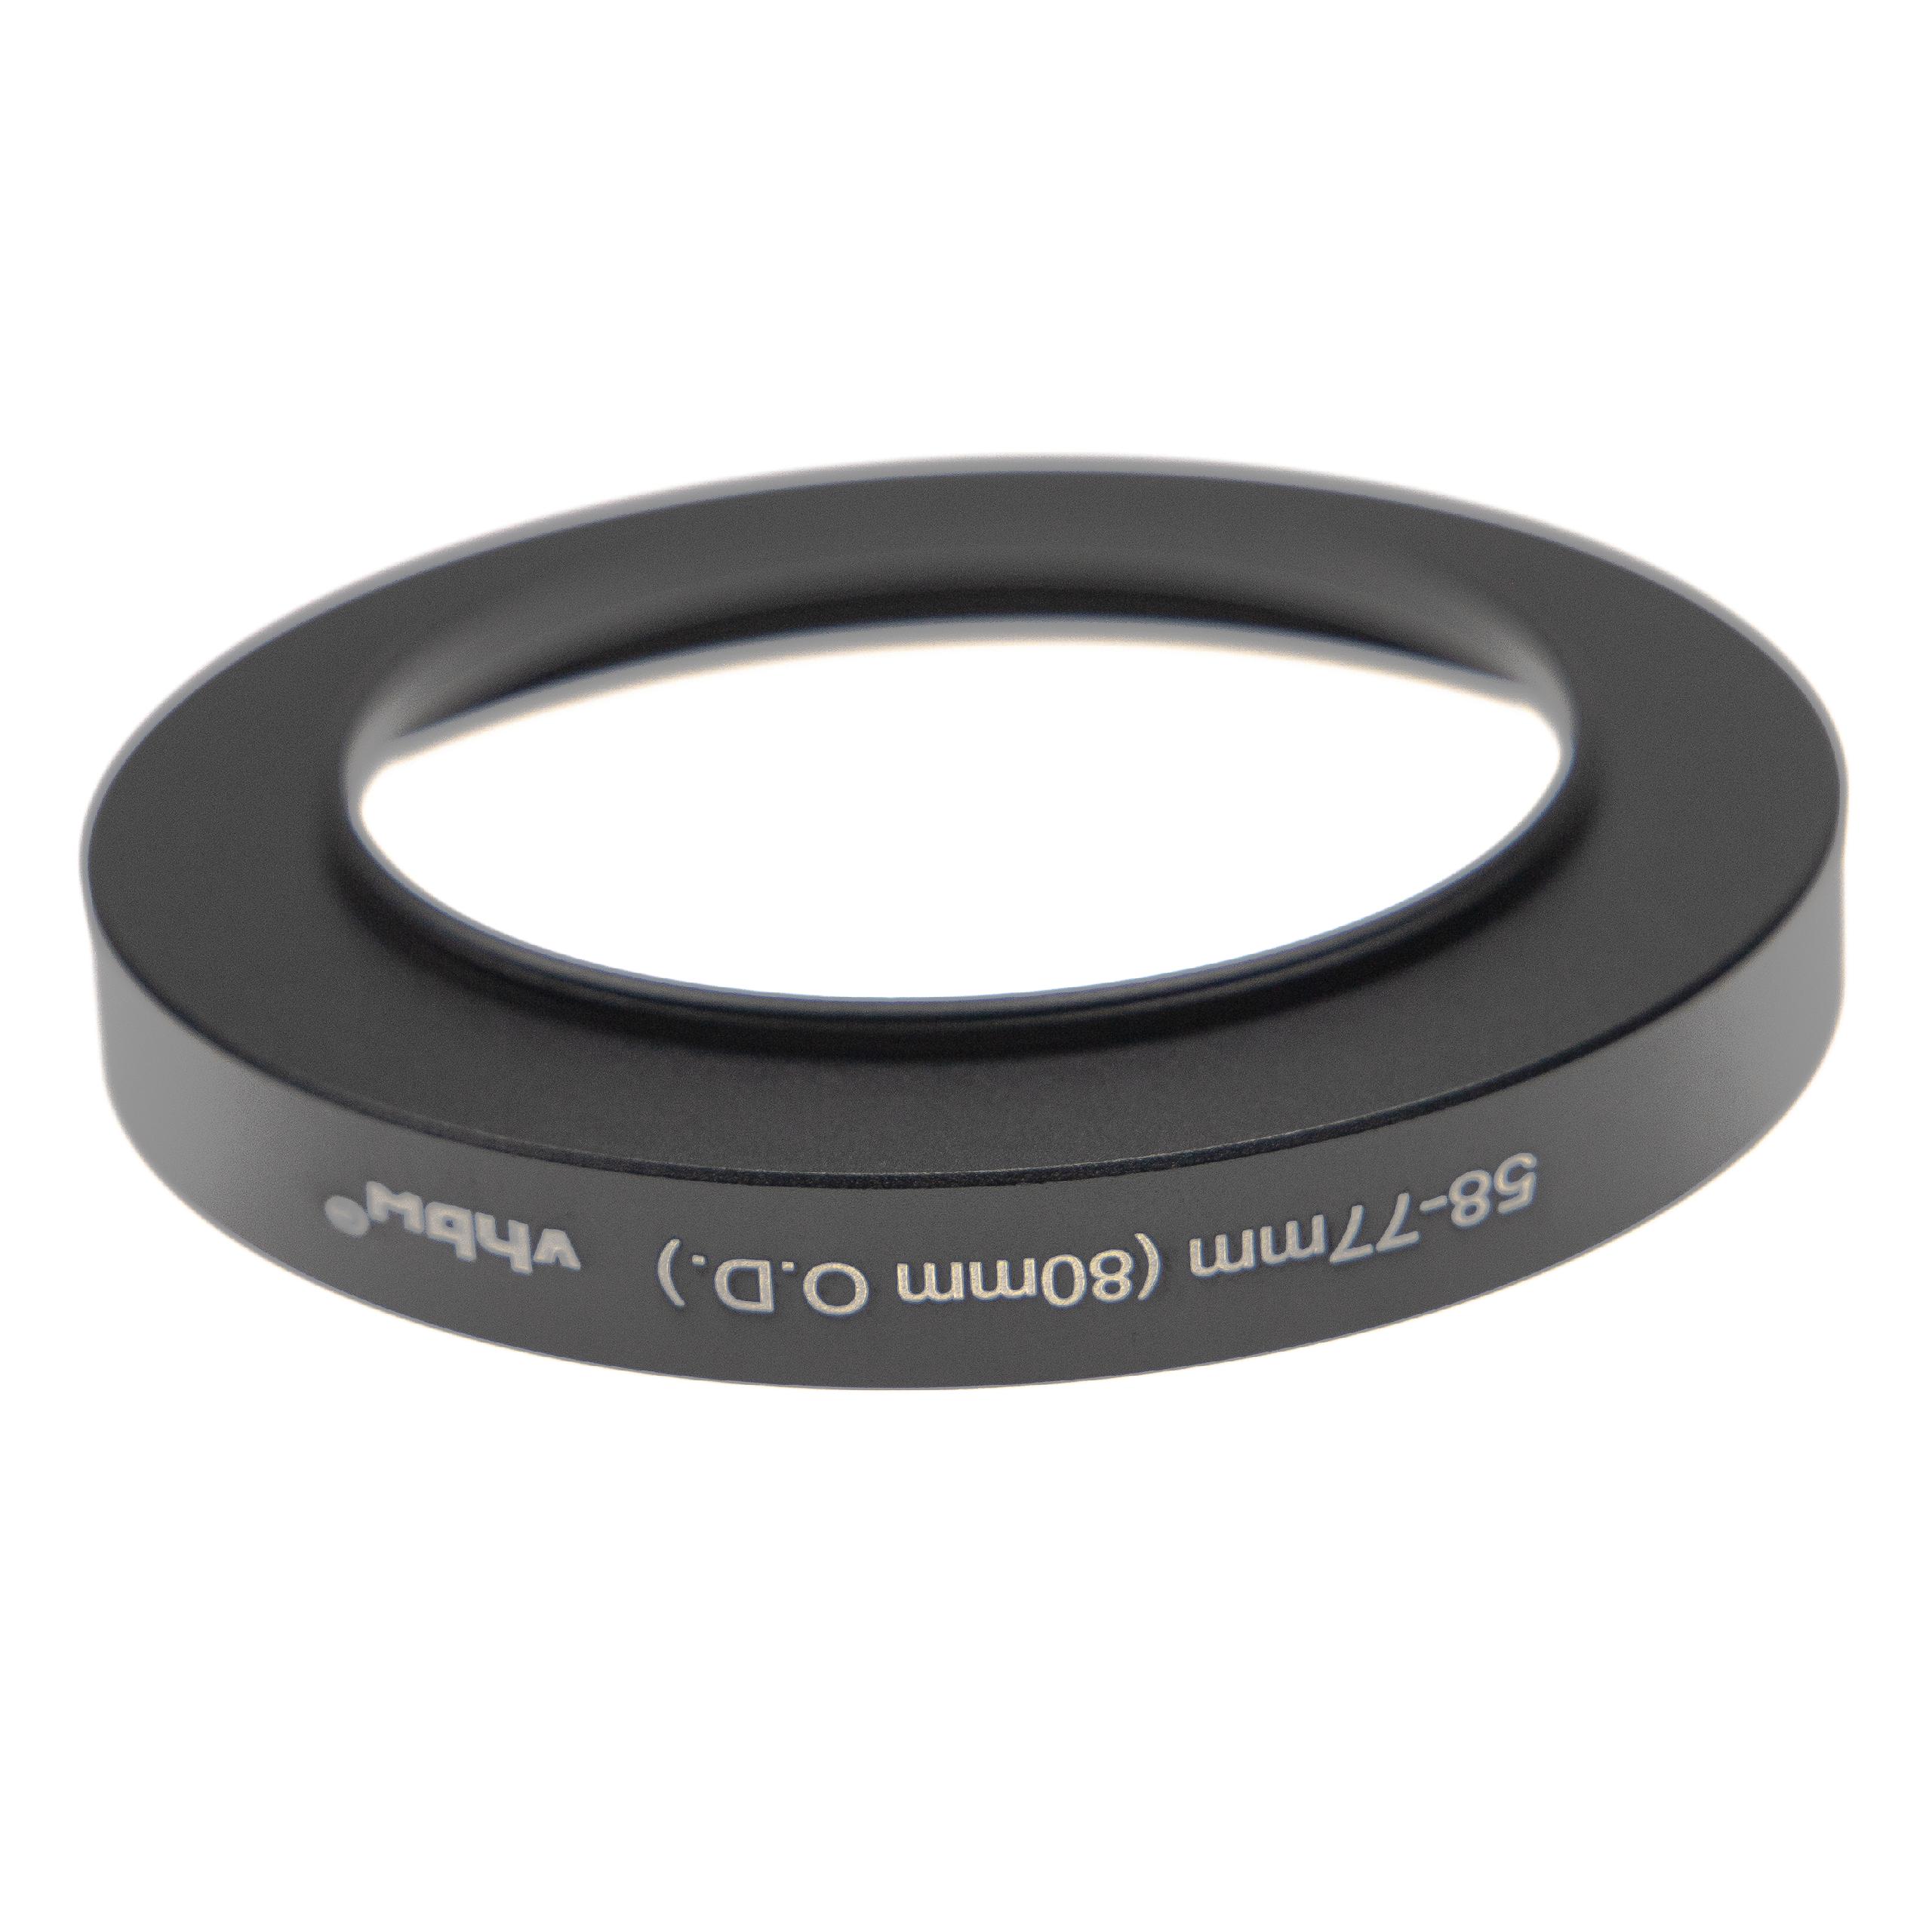 Step-Up Ring Adapter of 58 mm to 77 mm for matte box 80 mm O.D. - Filter Adapter